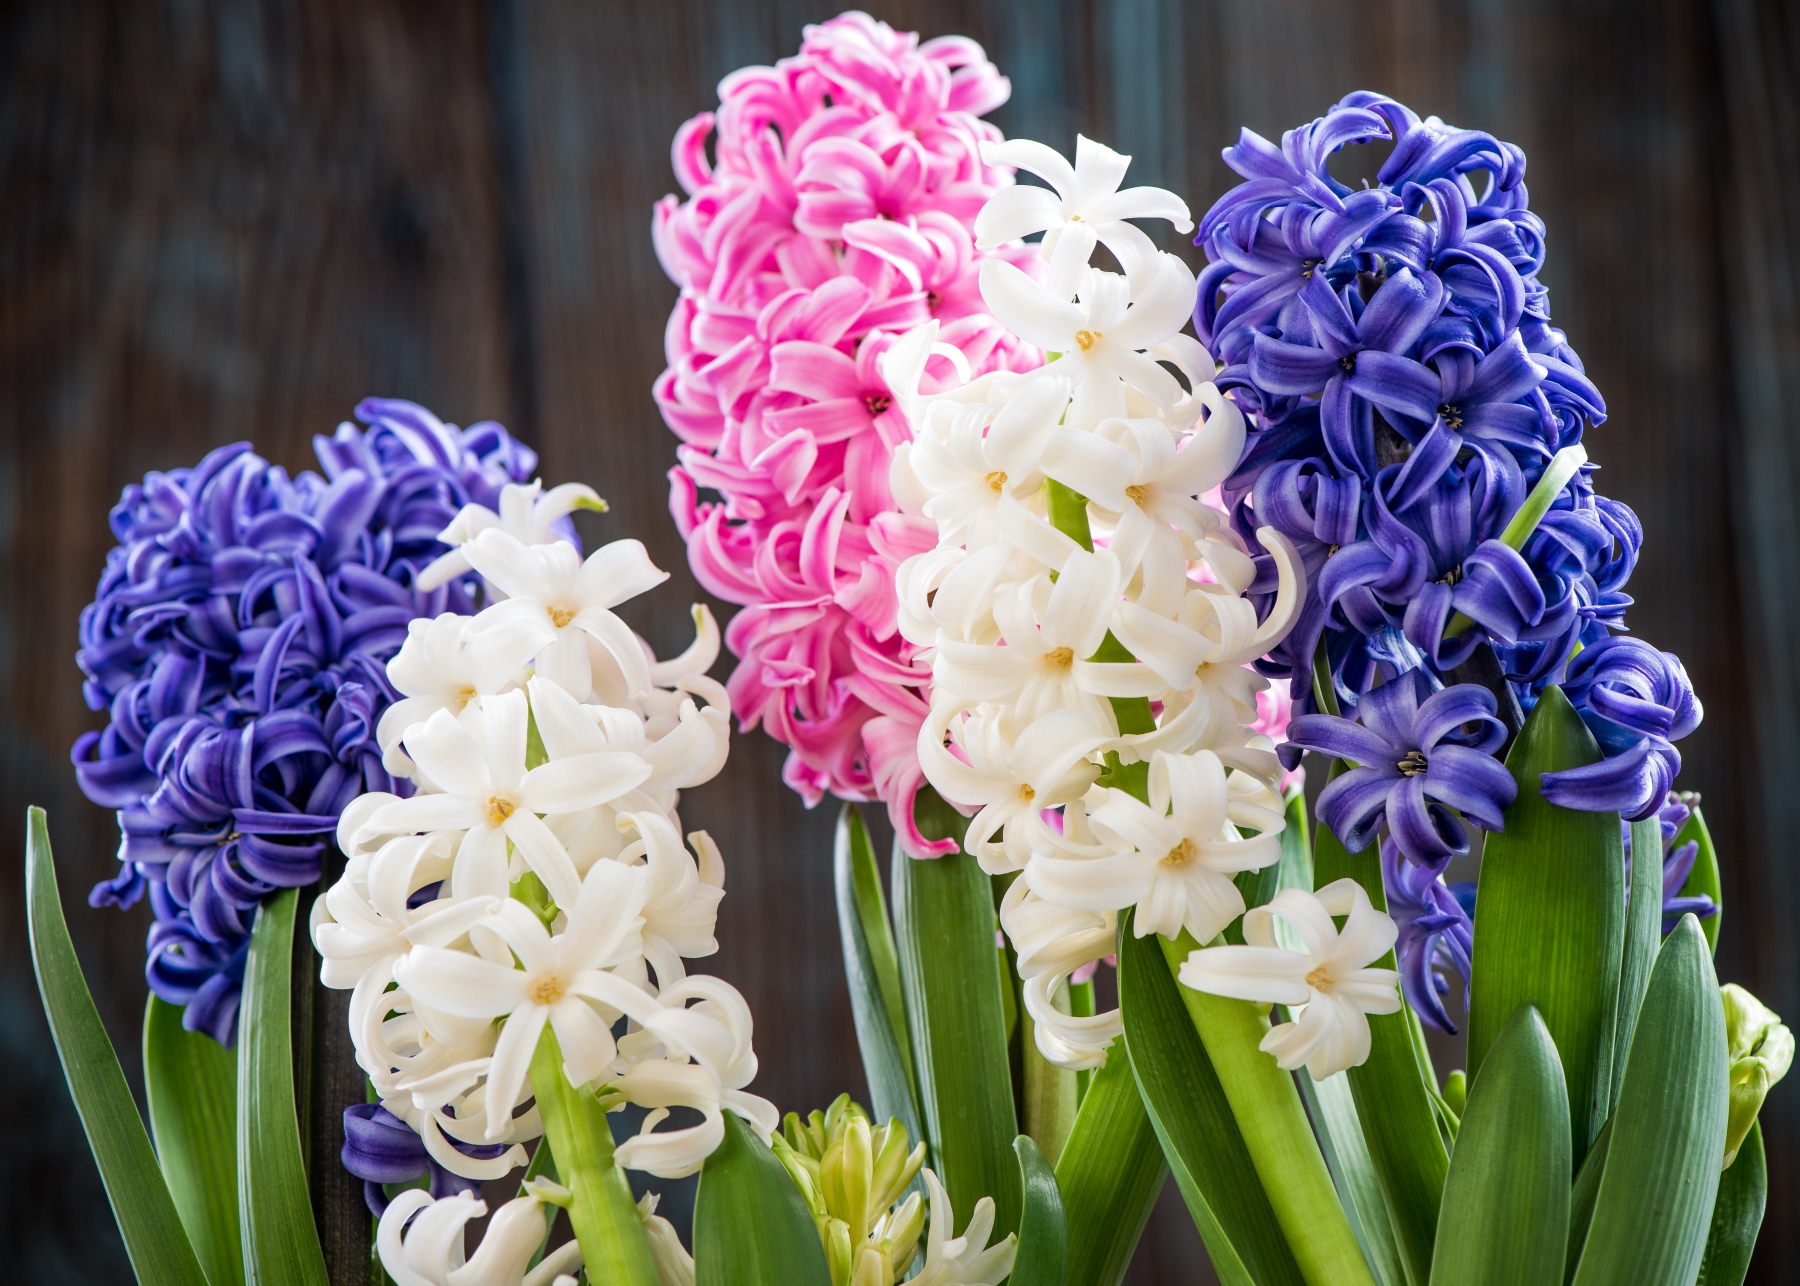 Hyacinths Planting and Caring for Hyacinth Flowers   The Old ...